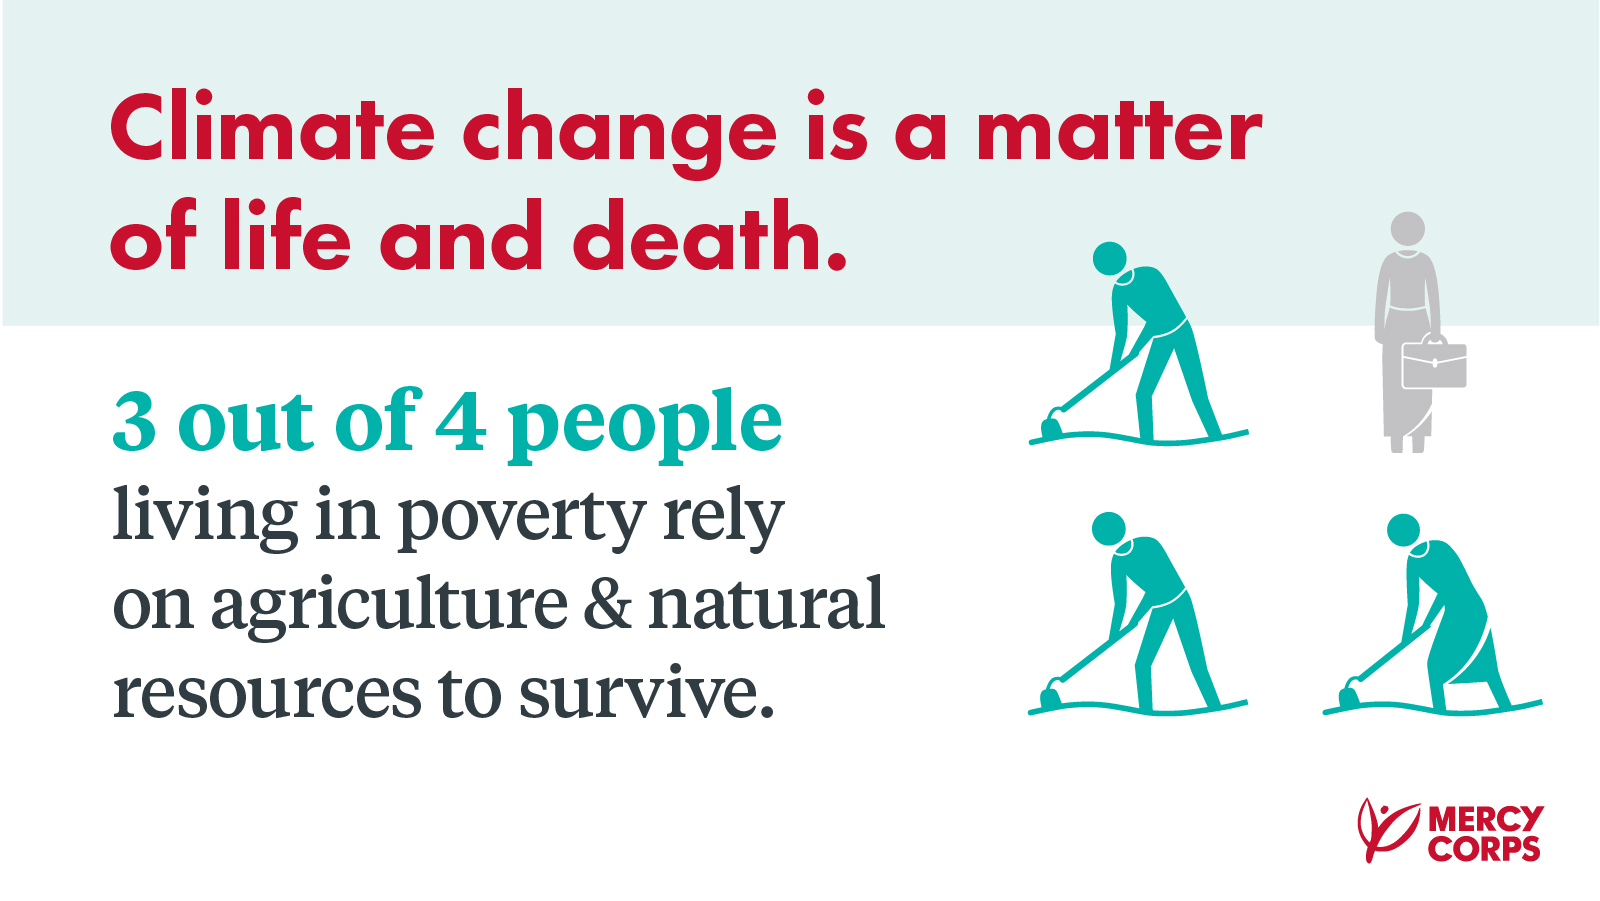 Climate change is a matter of life and death. 3 out of 4 people living in poverty rely on agriculture and natural resources to survive.